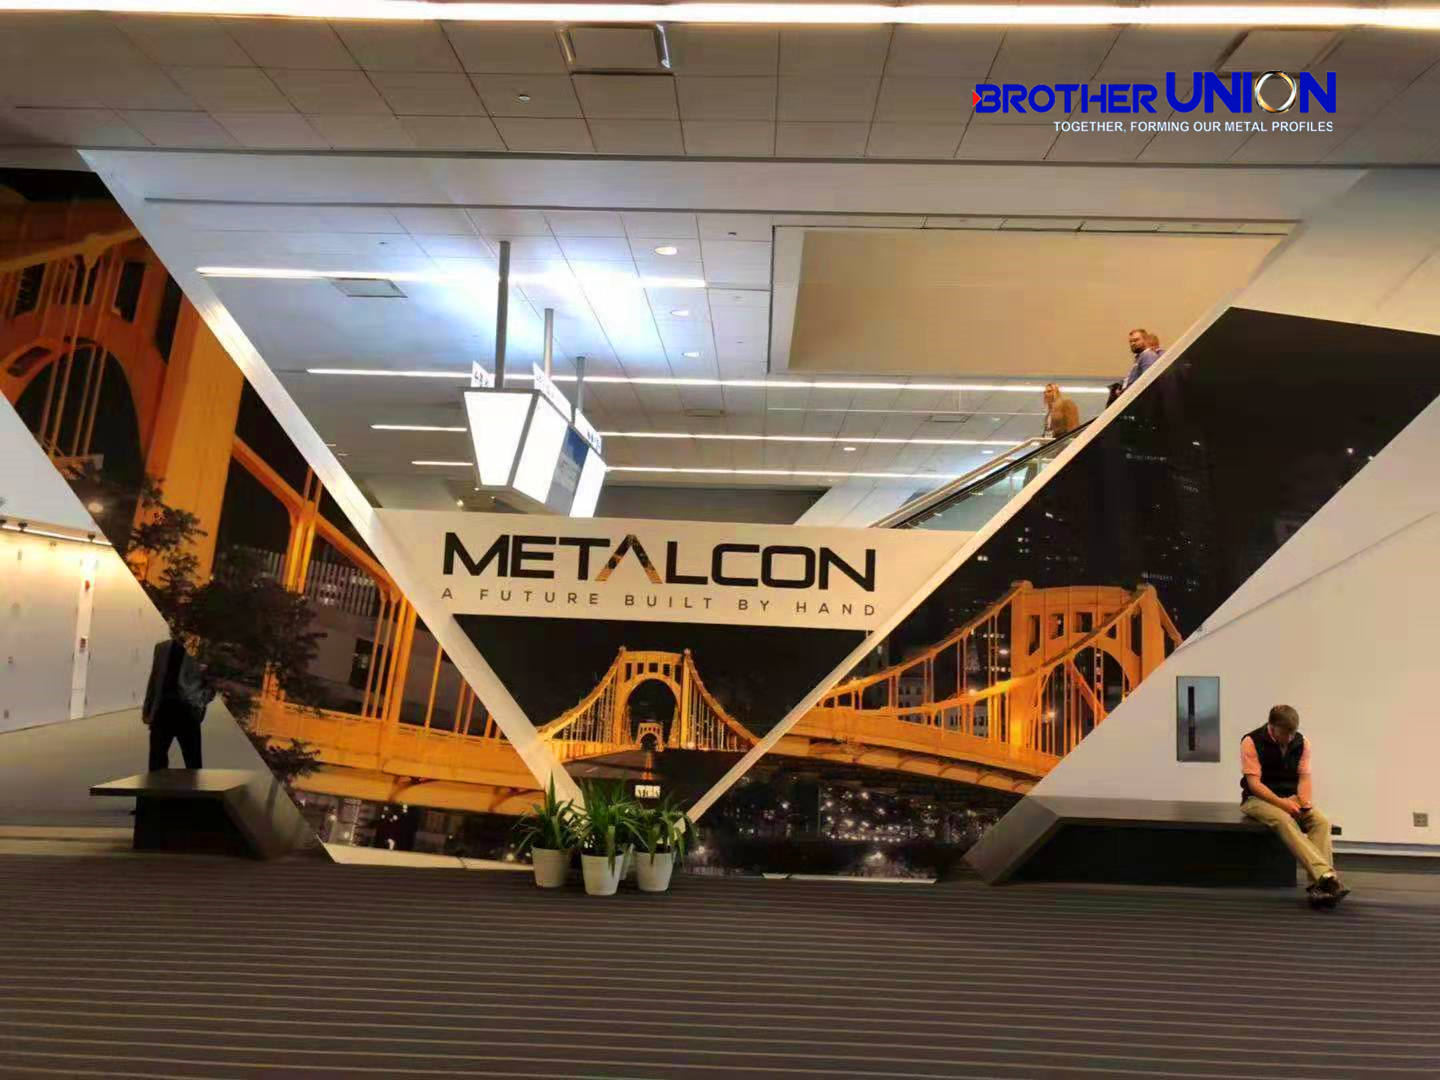 BU Roll Forming Machines in METALCON 